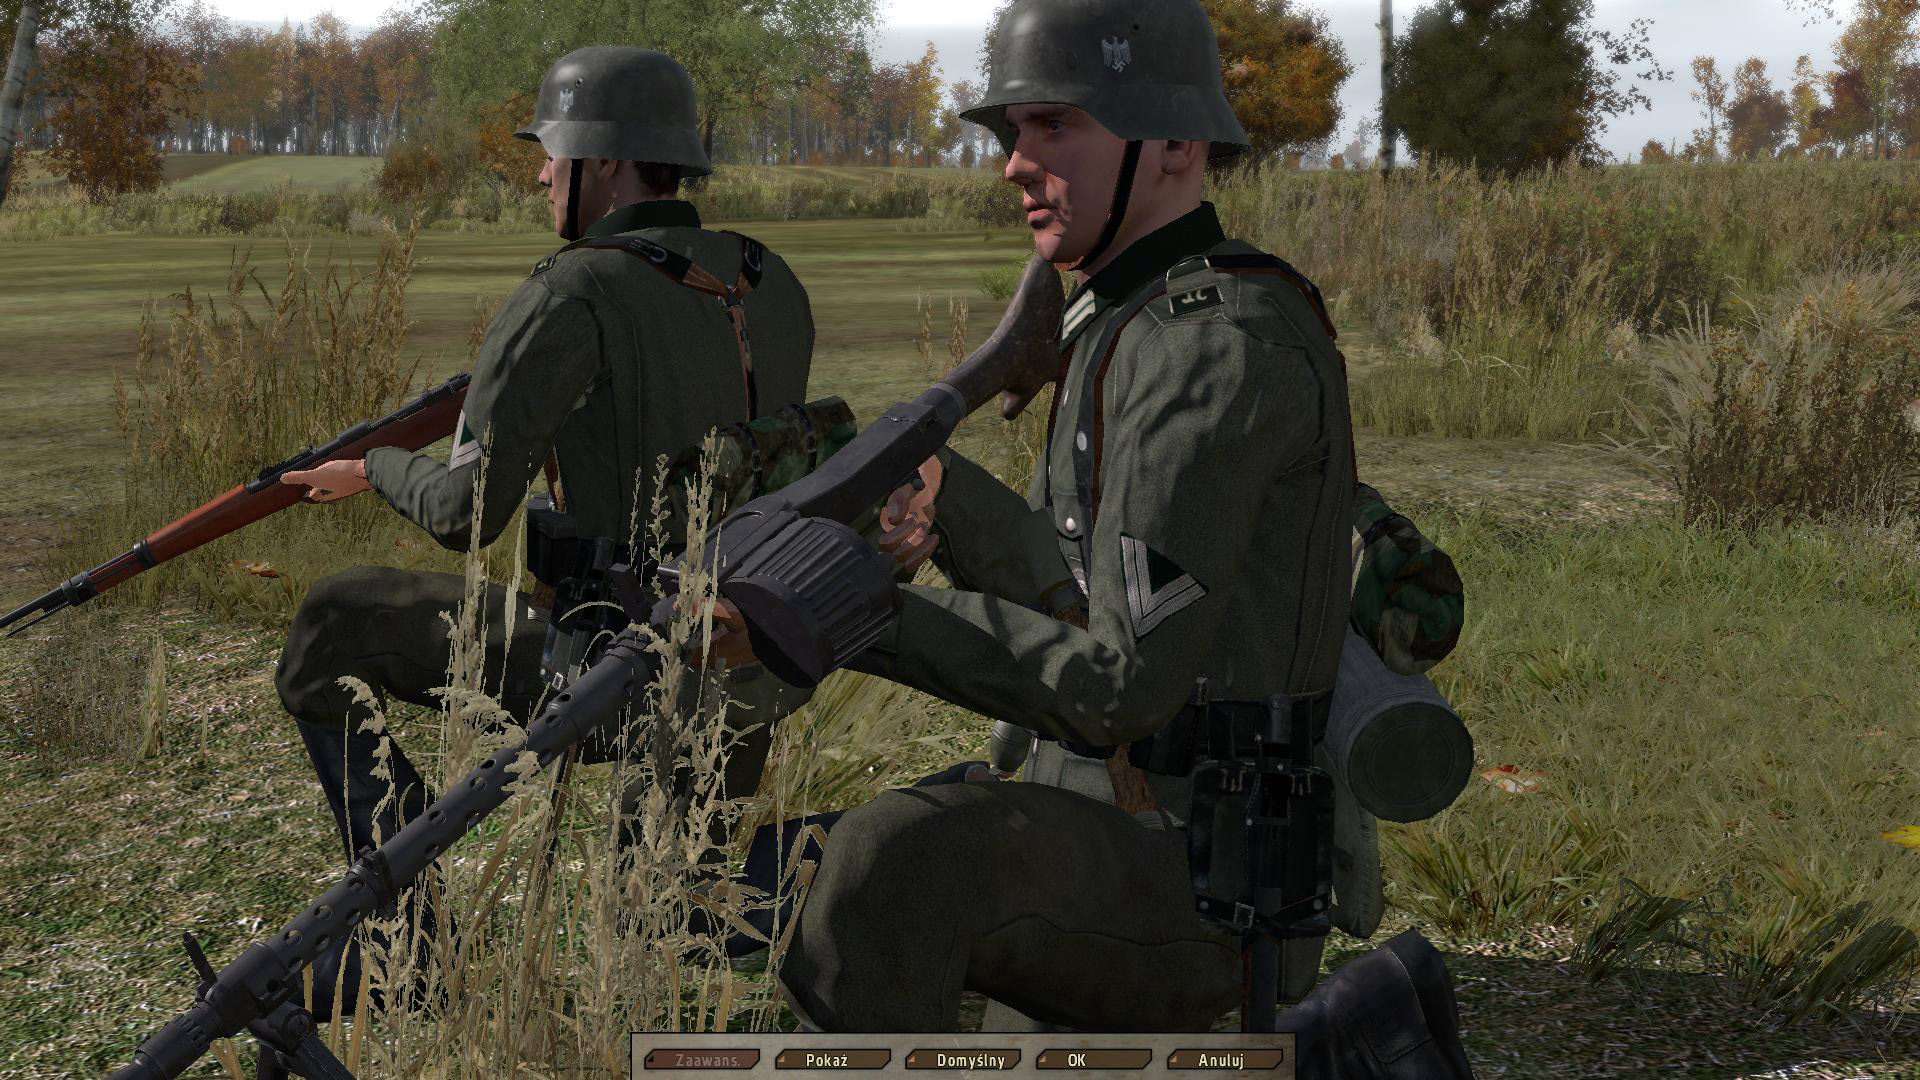 How To Install Mods In Arma 2 Free